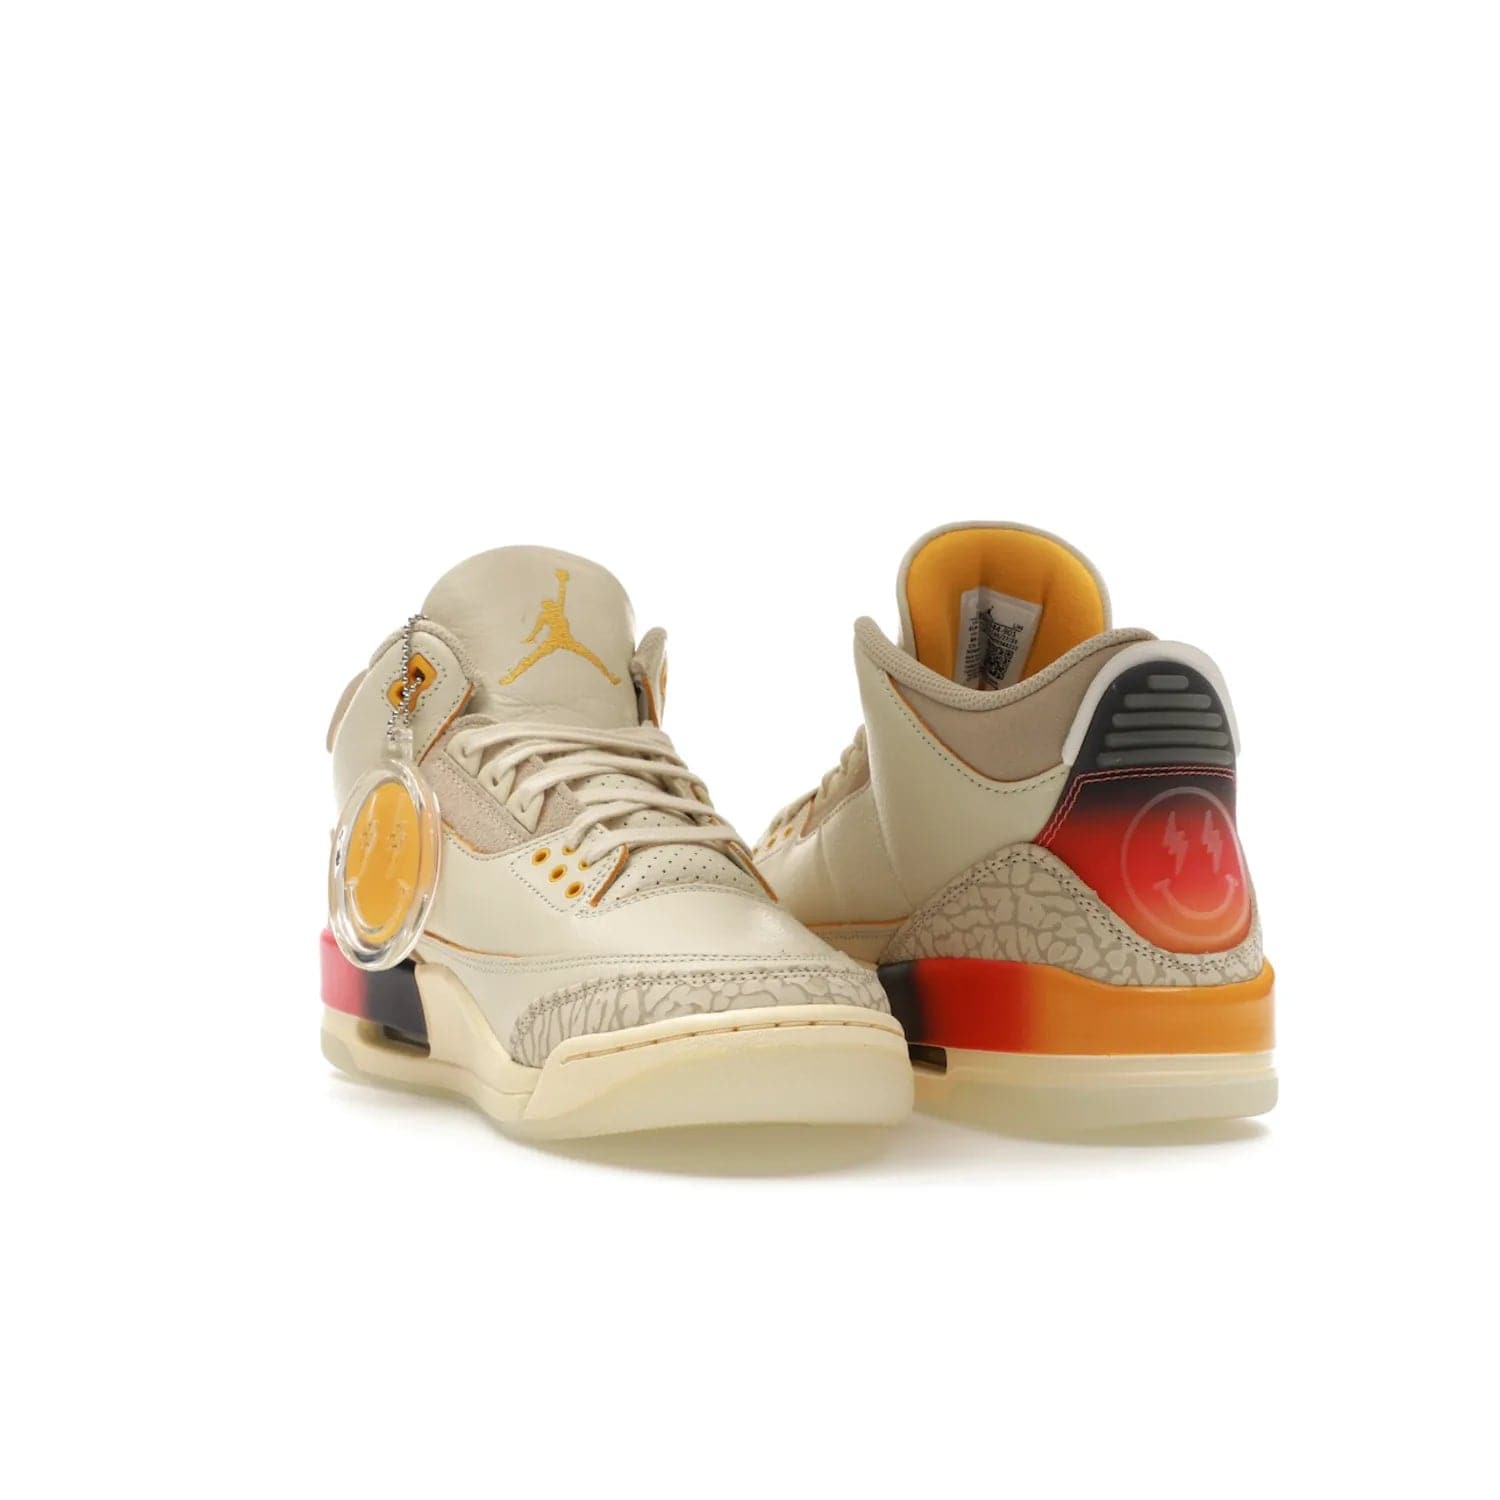 Jordan 3 Retro SP J Balvin Medellín Sunset - Image 25 - Only at www.BallersClubKickz.com - J Balvin x Jordan 3 Retro SP: Celebrate the joy of life with a colorful, homage to the electrifying reggaeton culture and iconic Jordan 3. Limited edition, Sept. 23. $250.